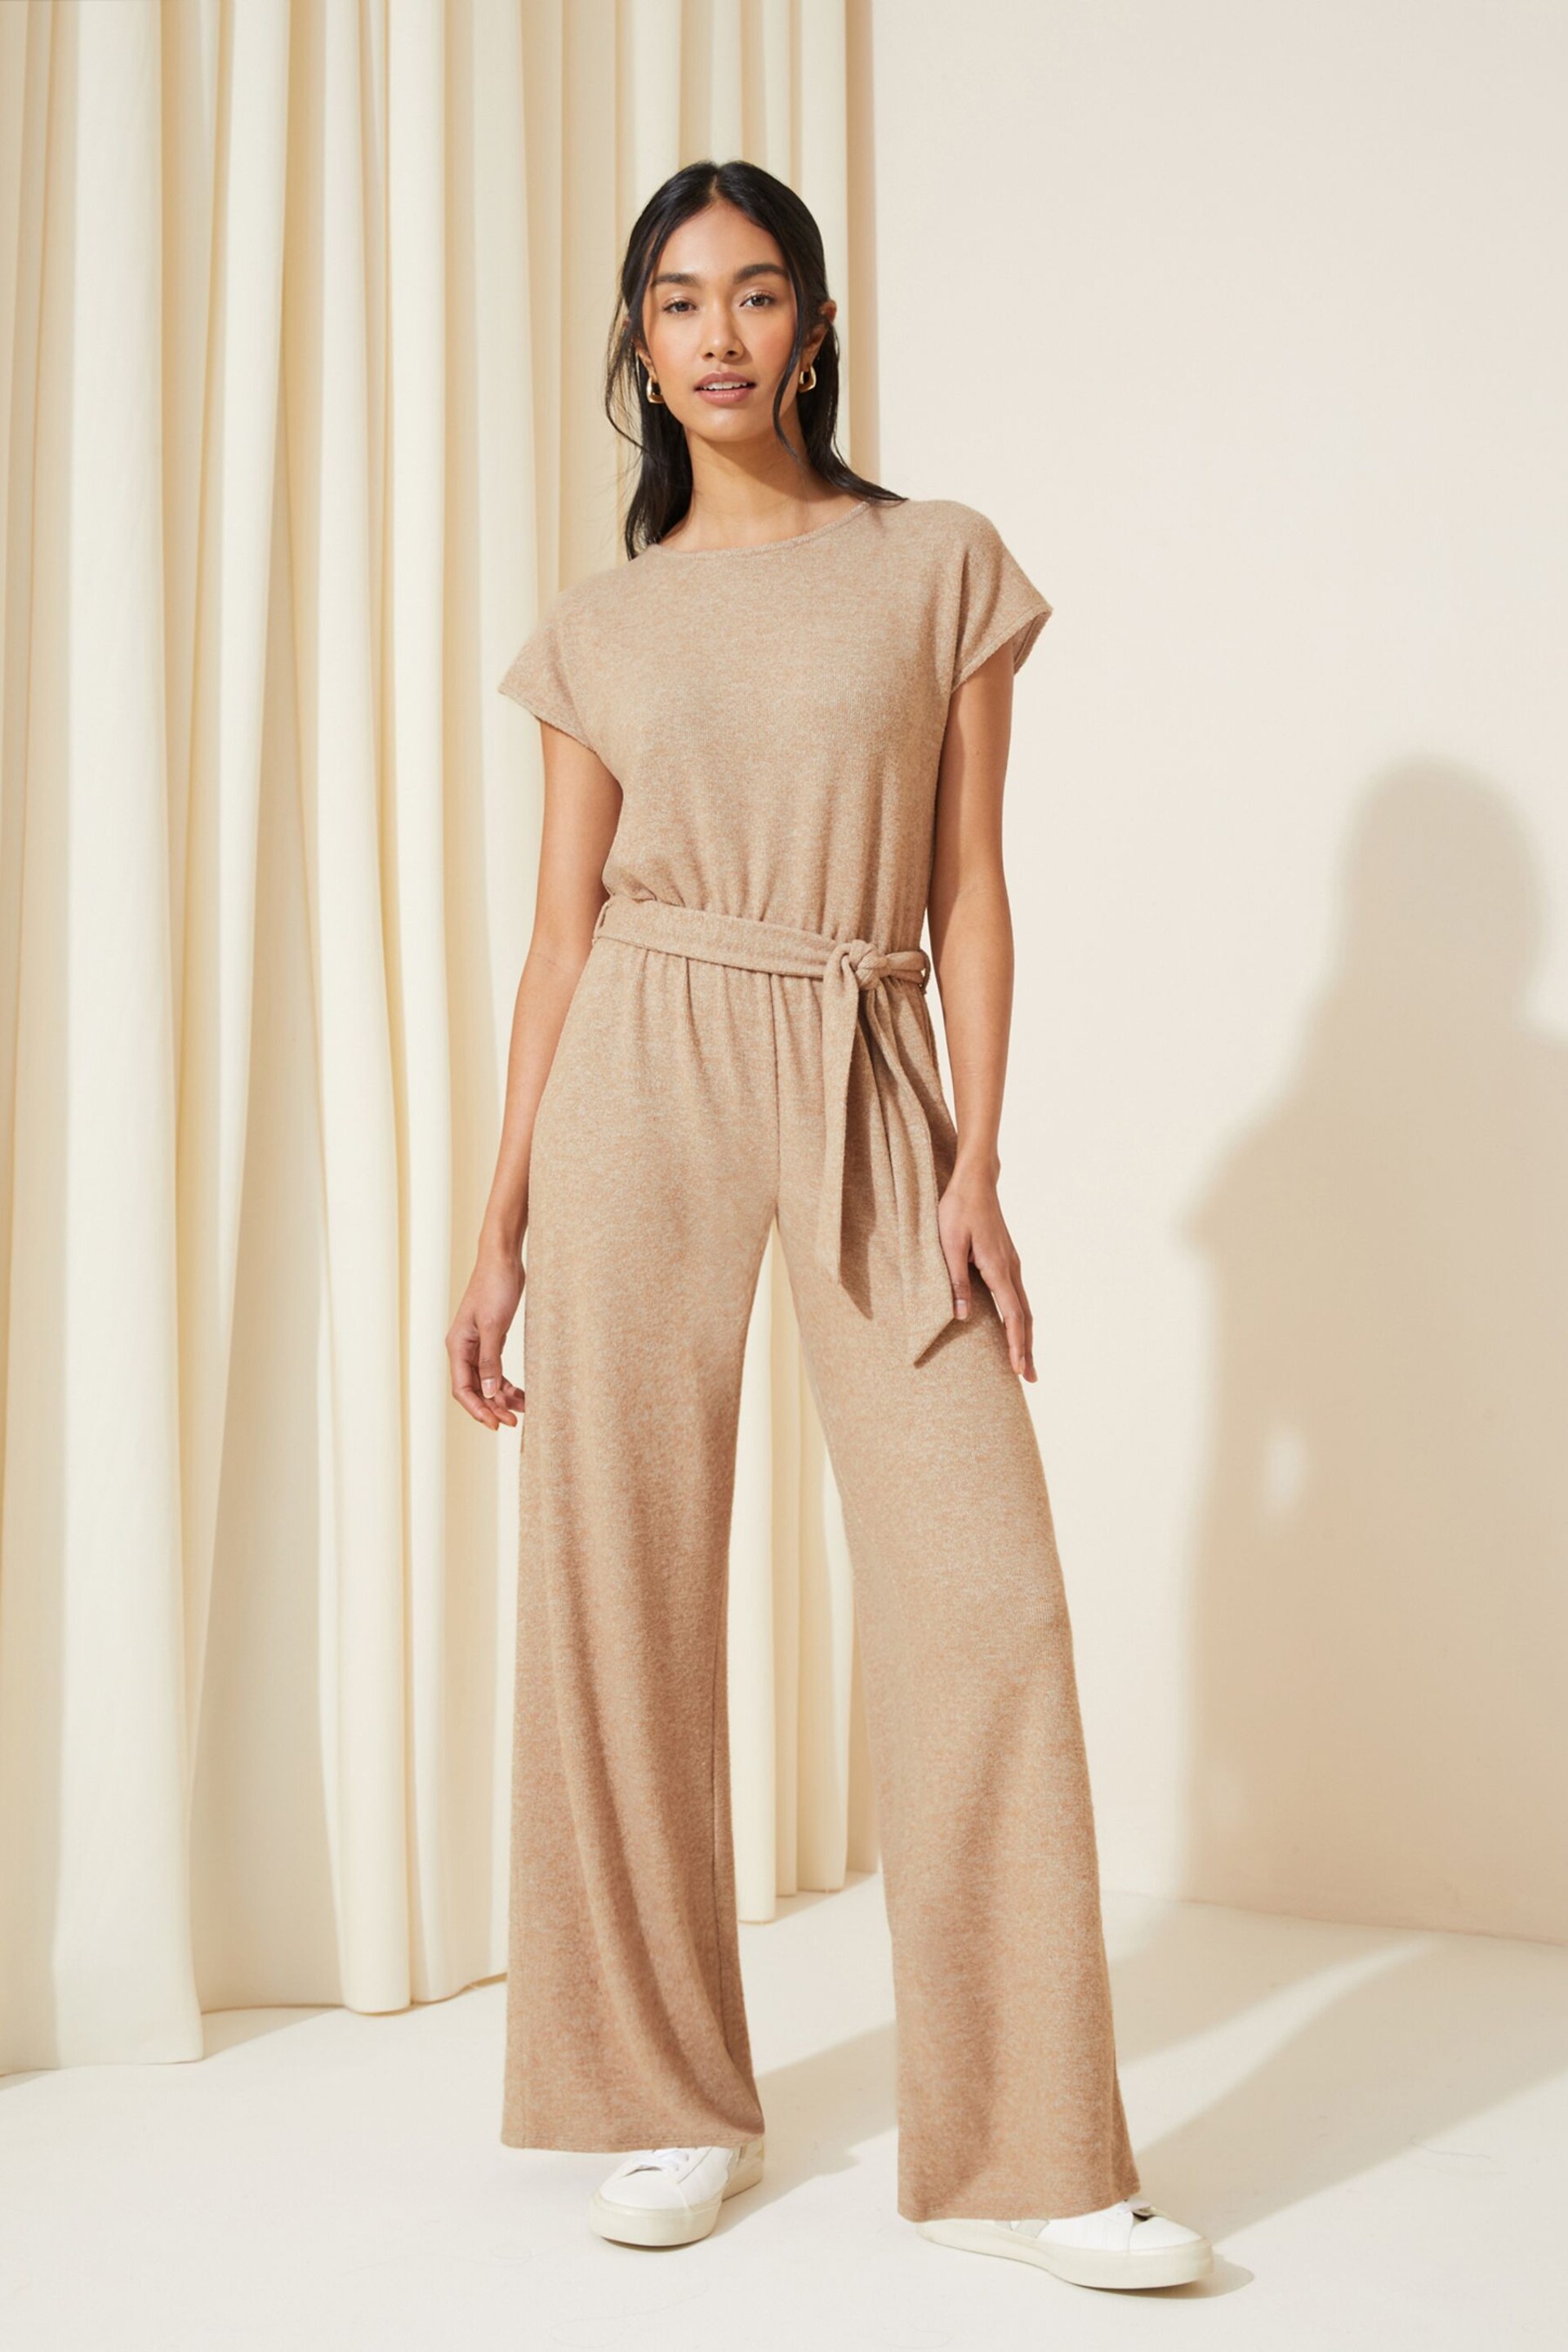 Friends Like These Camel Tie Belt Cosy Knit Rolled Sleeve Jumpsuit - Image 1 of 4